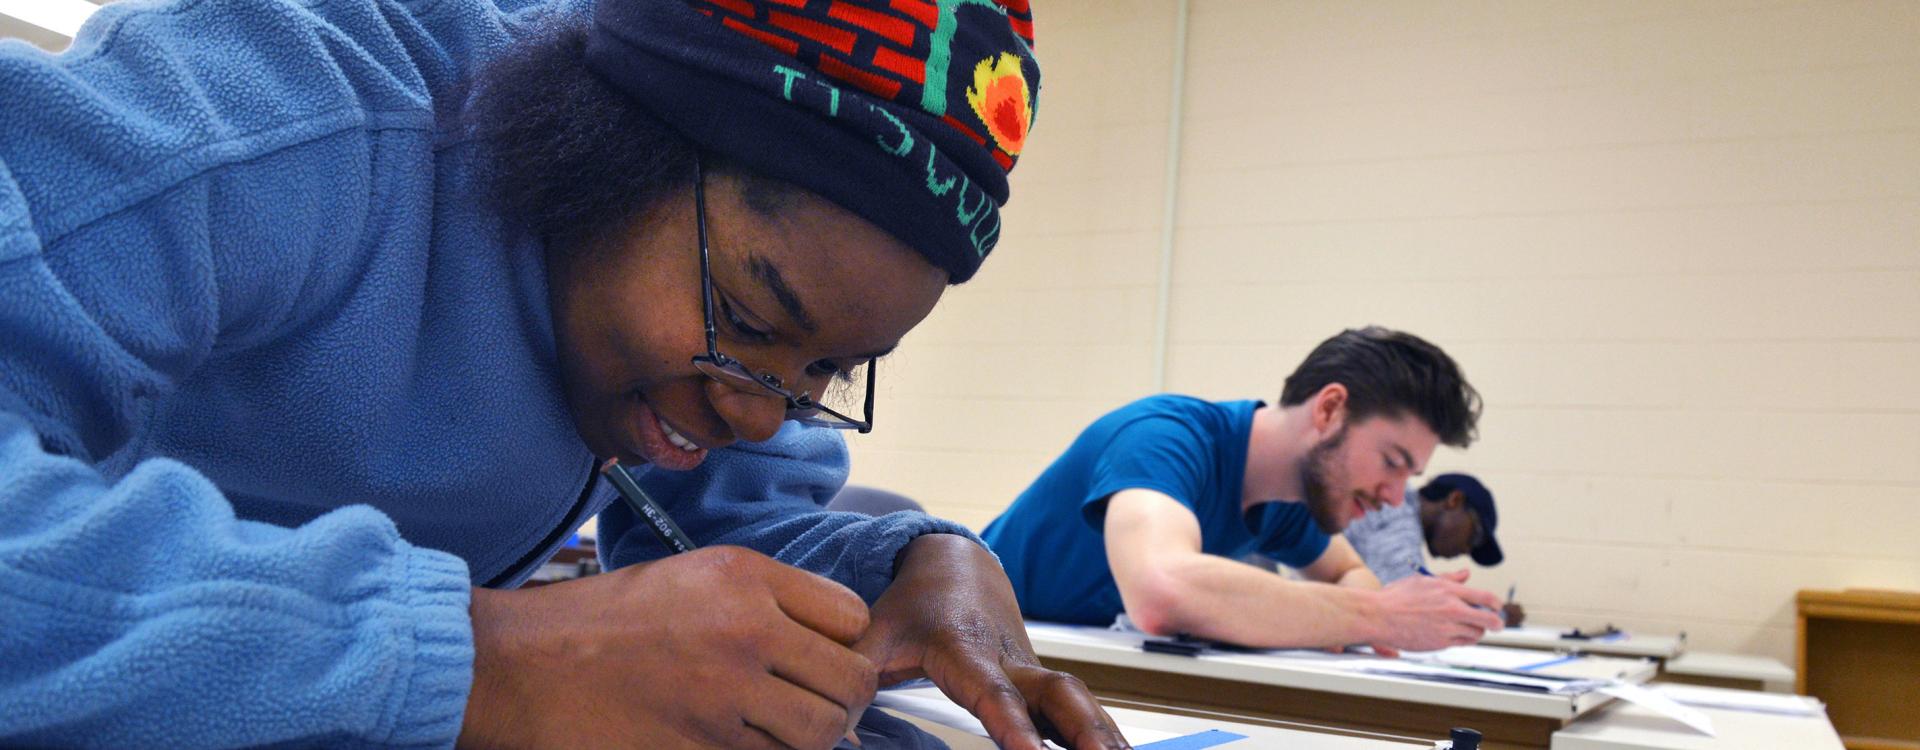 A Durham Tech student holds a pencil and focuses on work in a classroom